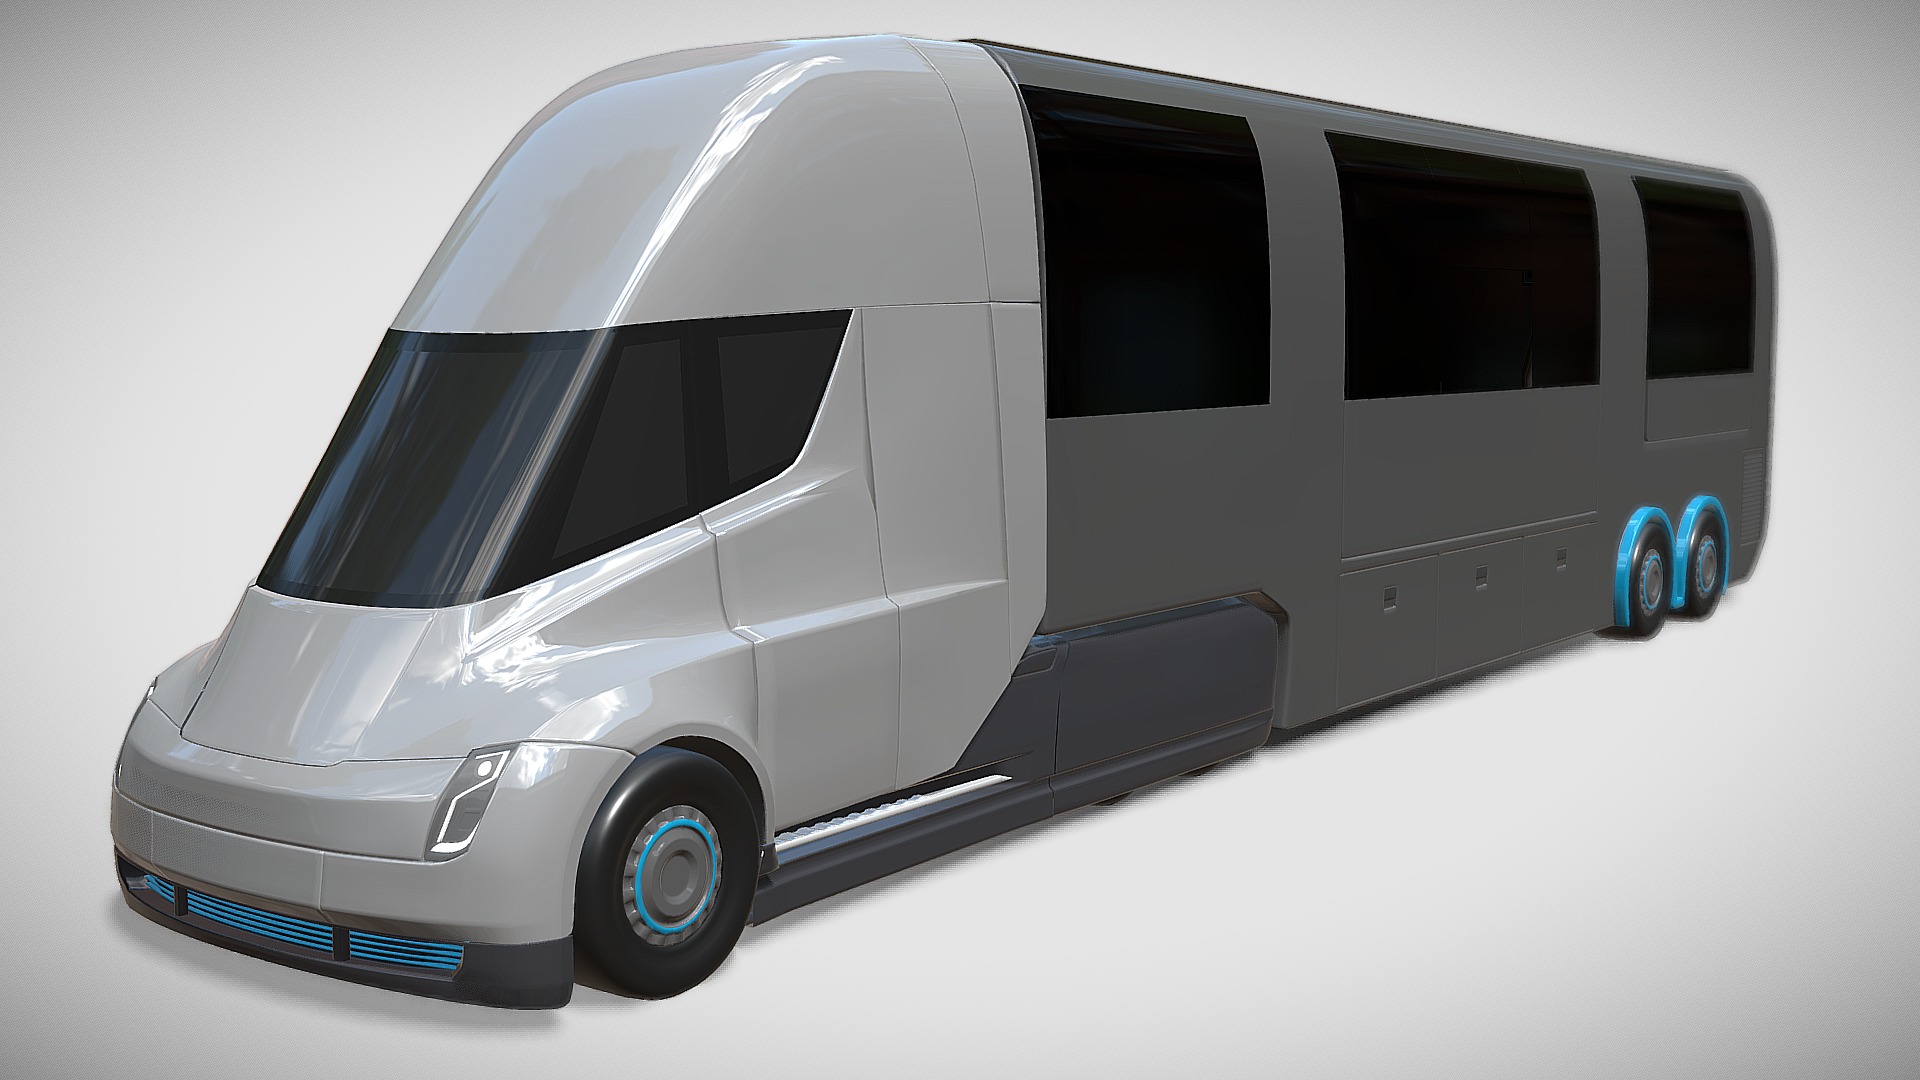 3D model Tesla Semi Truck RV Styling - This is a 3D model of the Tesla Semi Truck RV Styling. The 3D model is about a silver and black van.